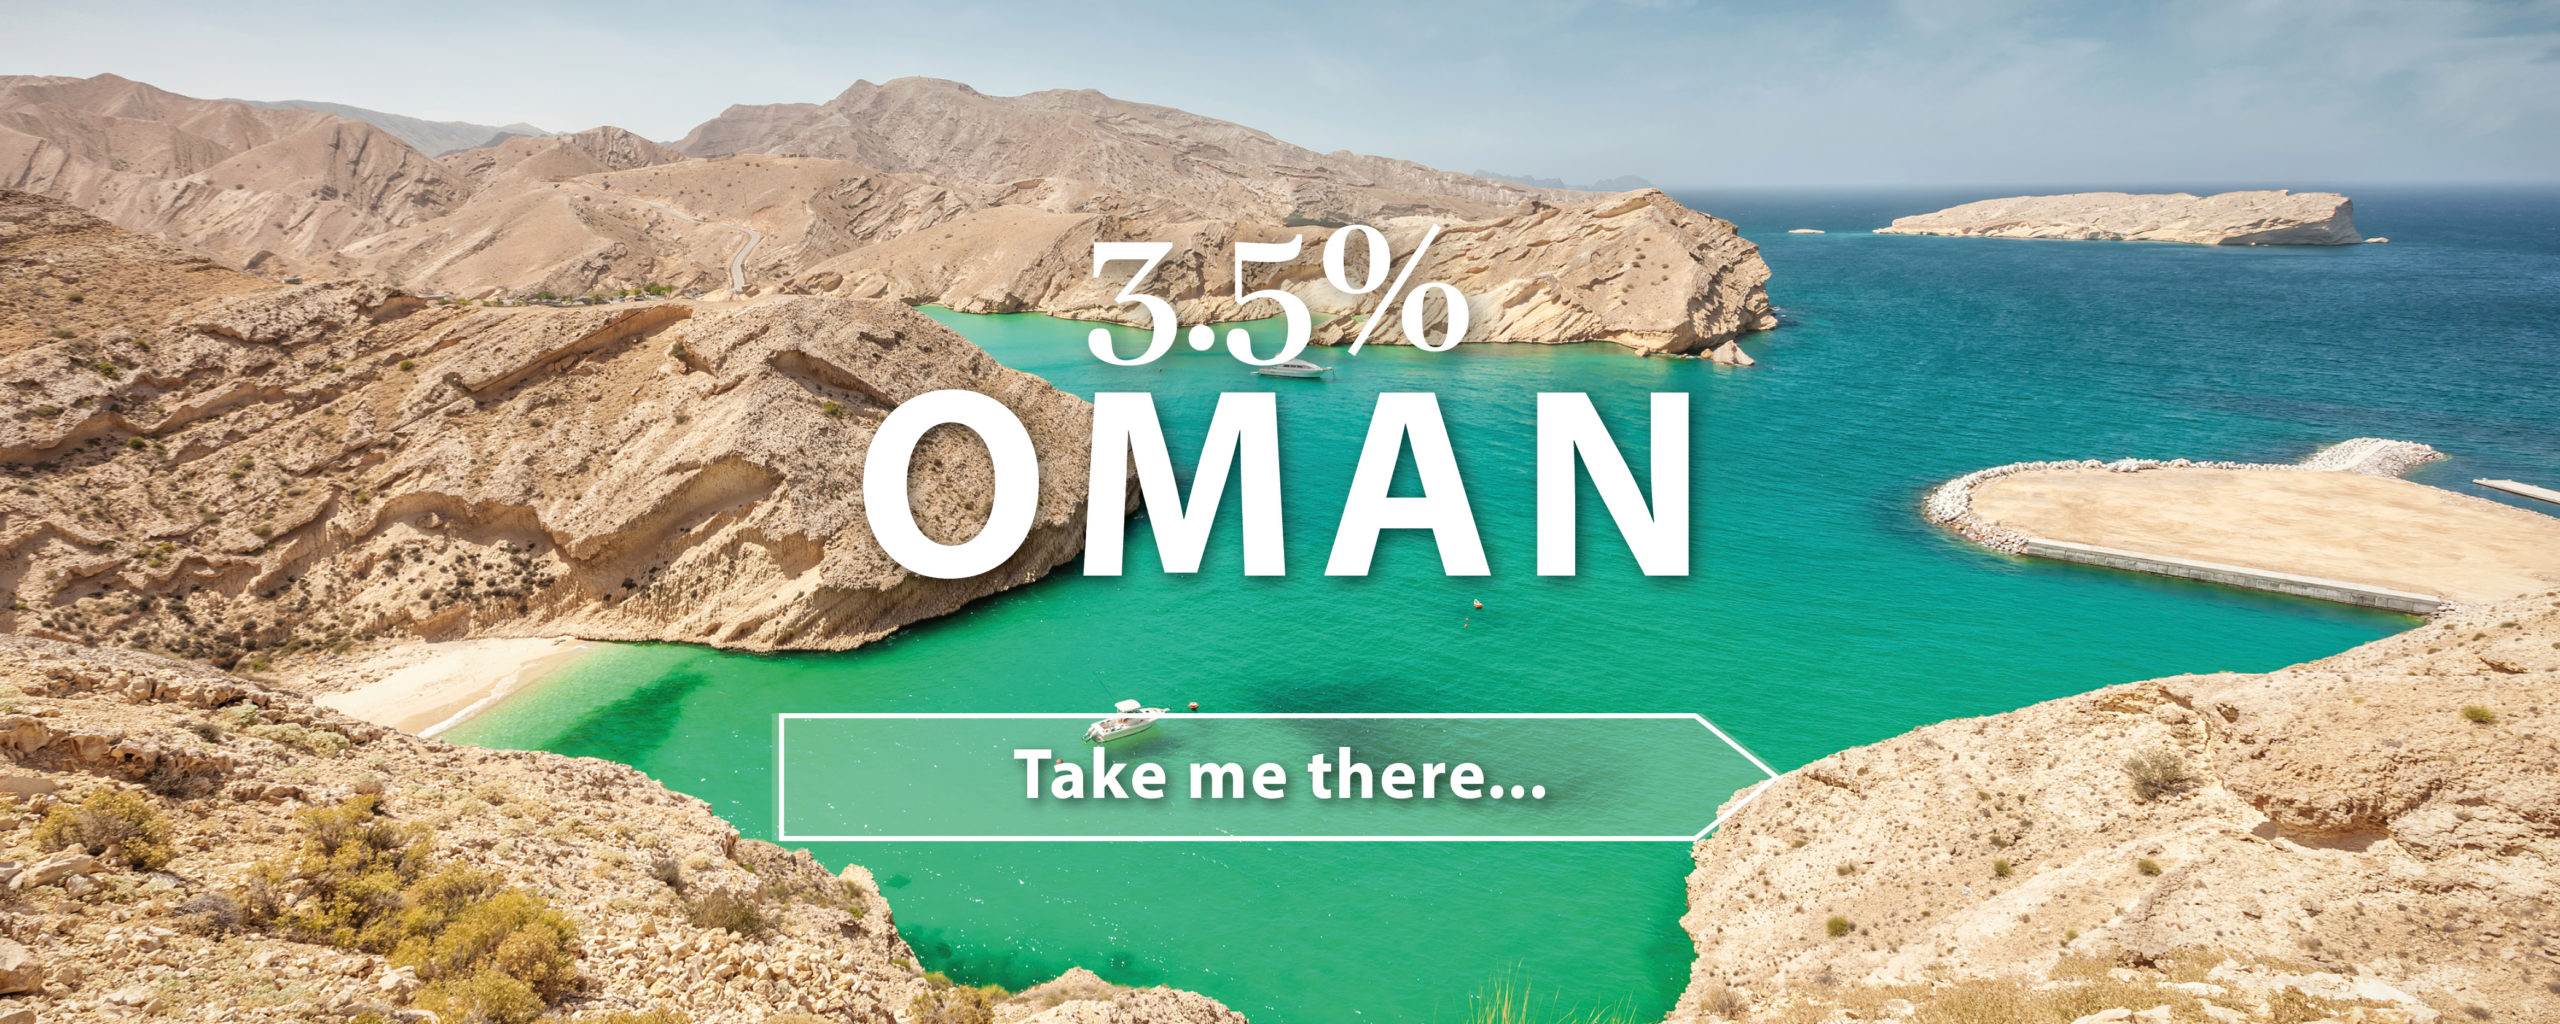 Where youre going this year_Oman